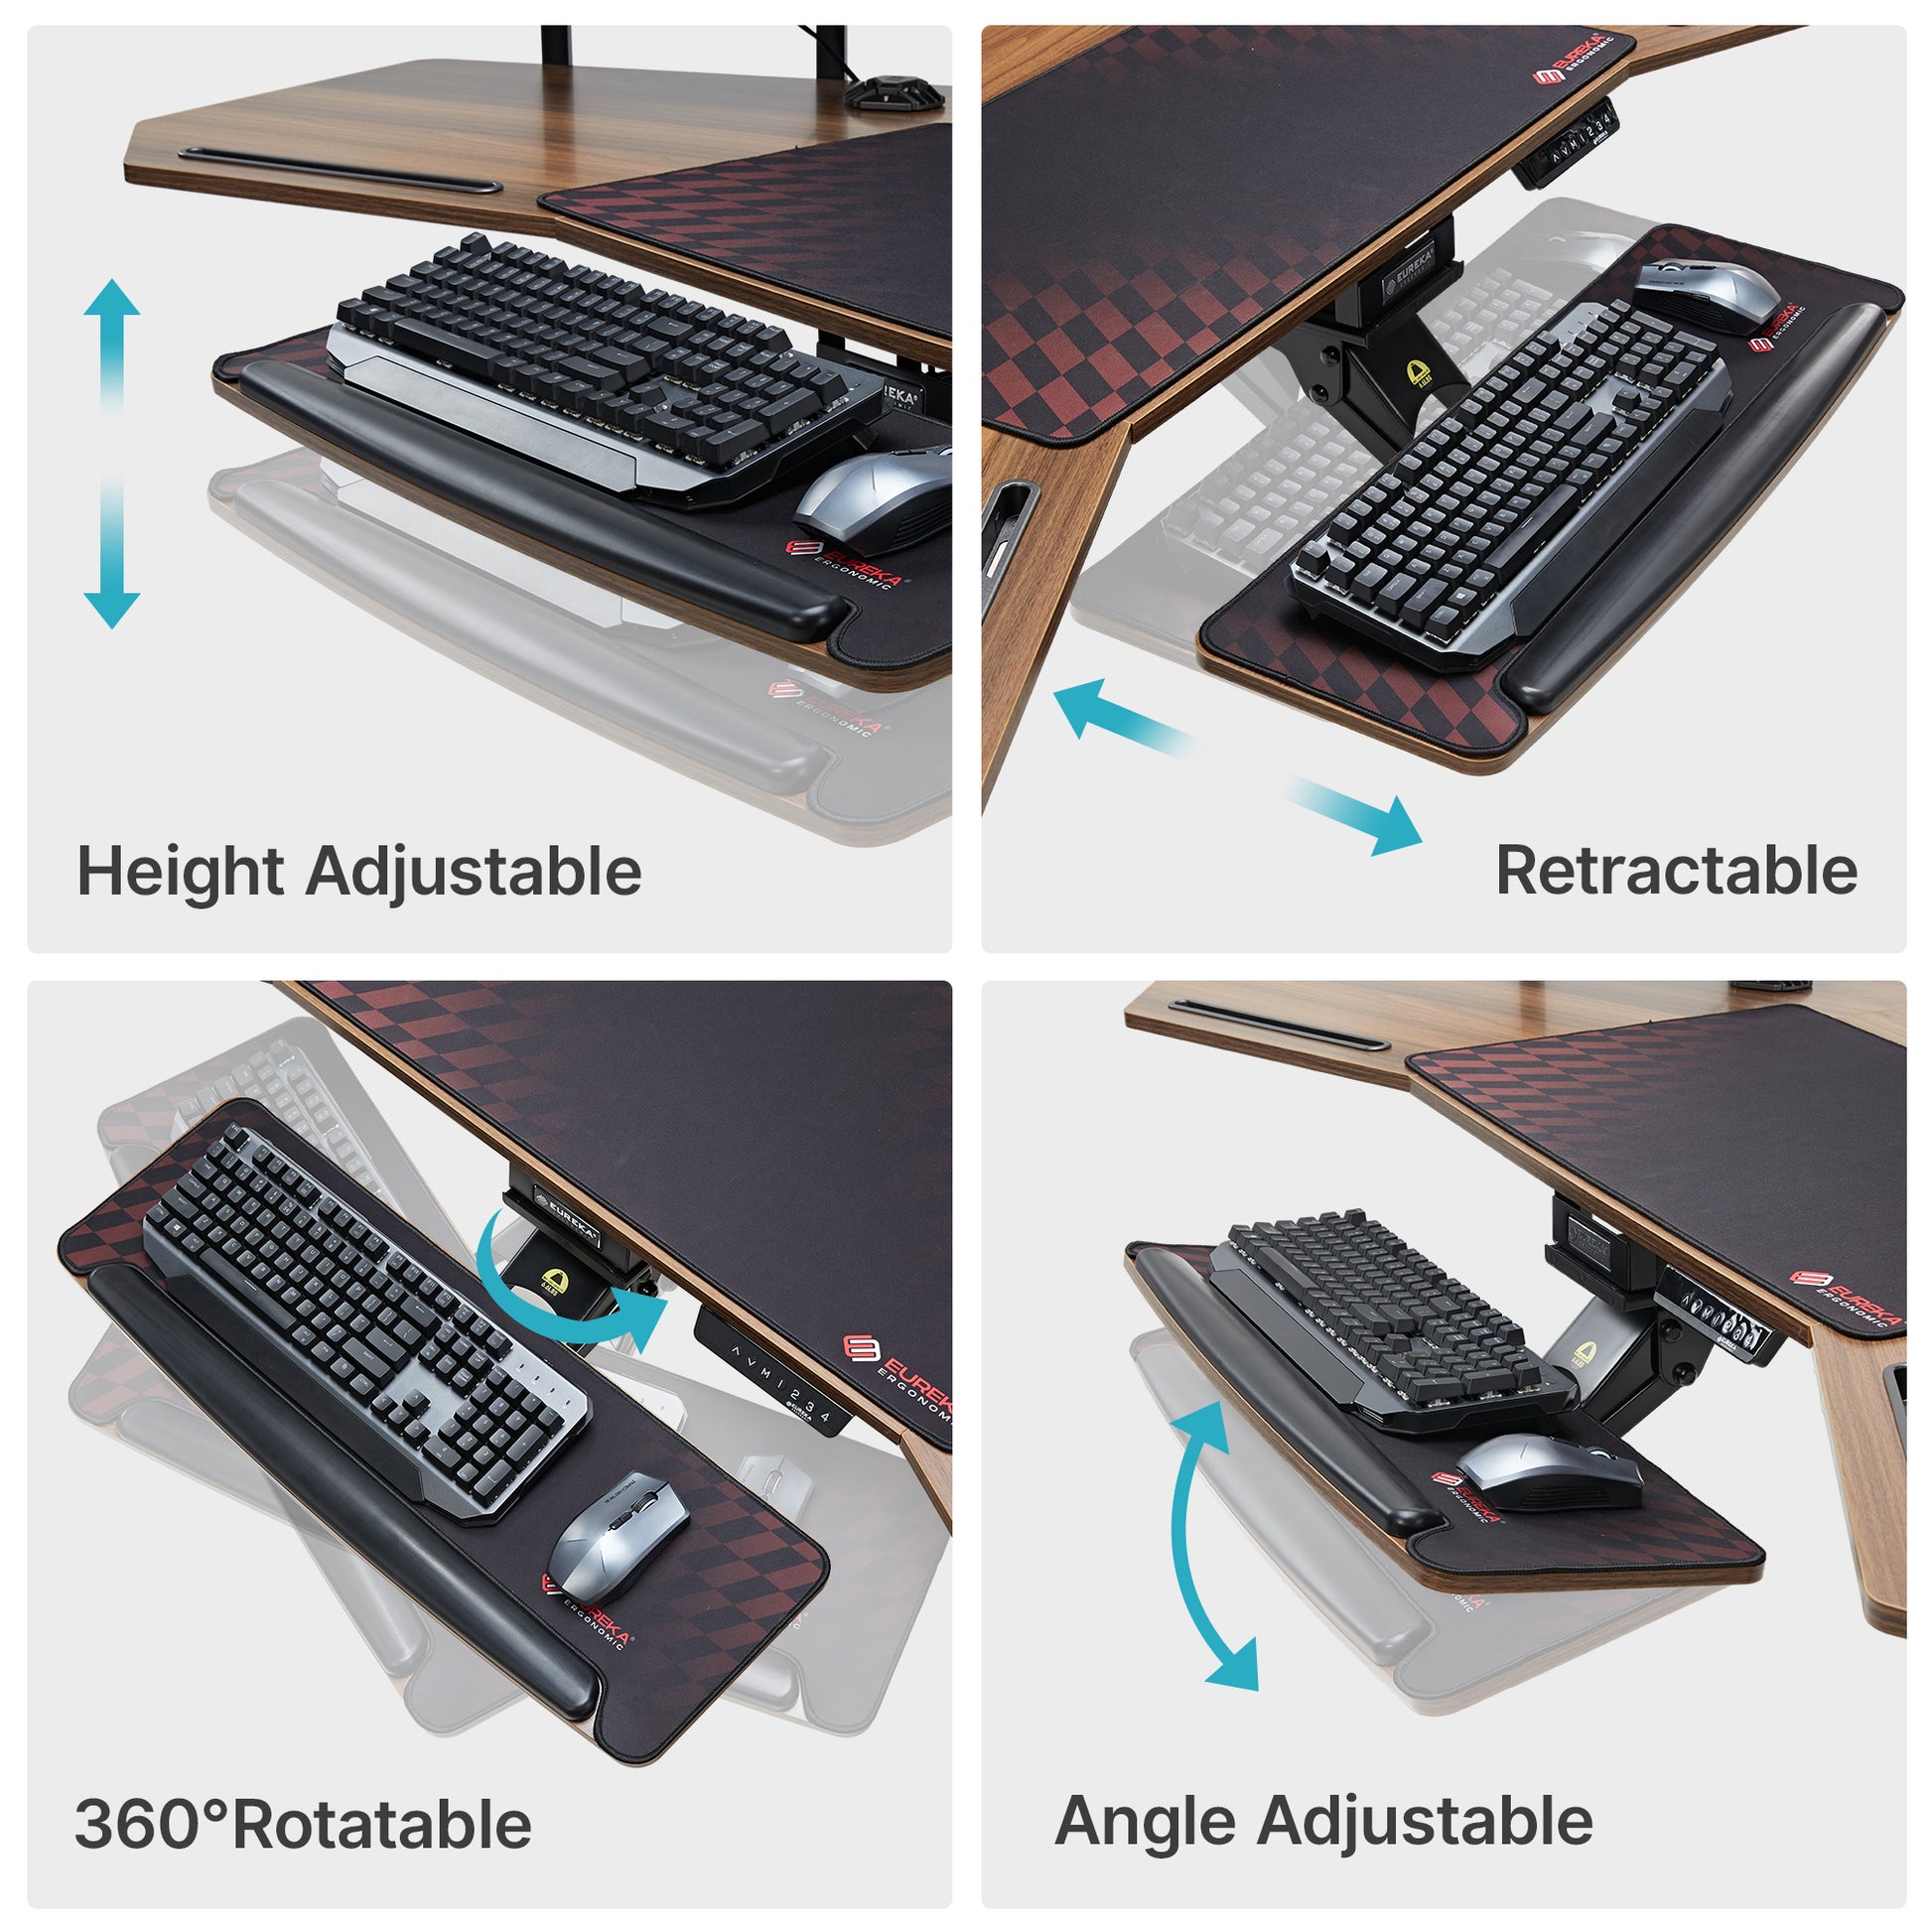 Desk with Adjustable Keyboard Tray